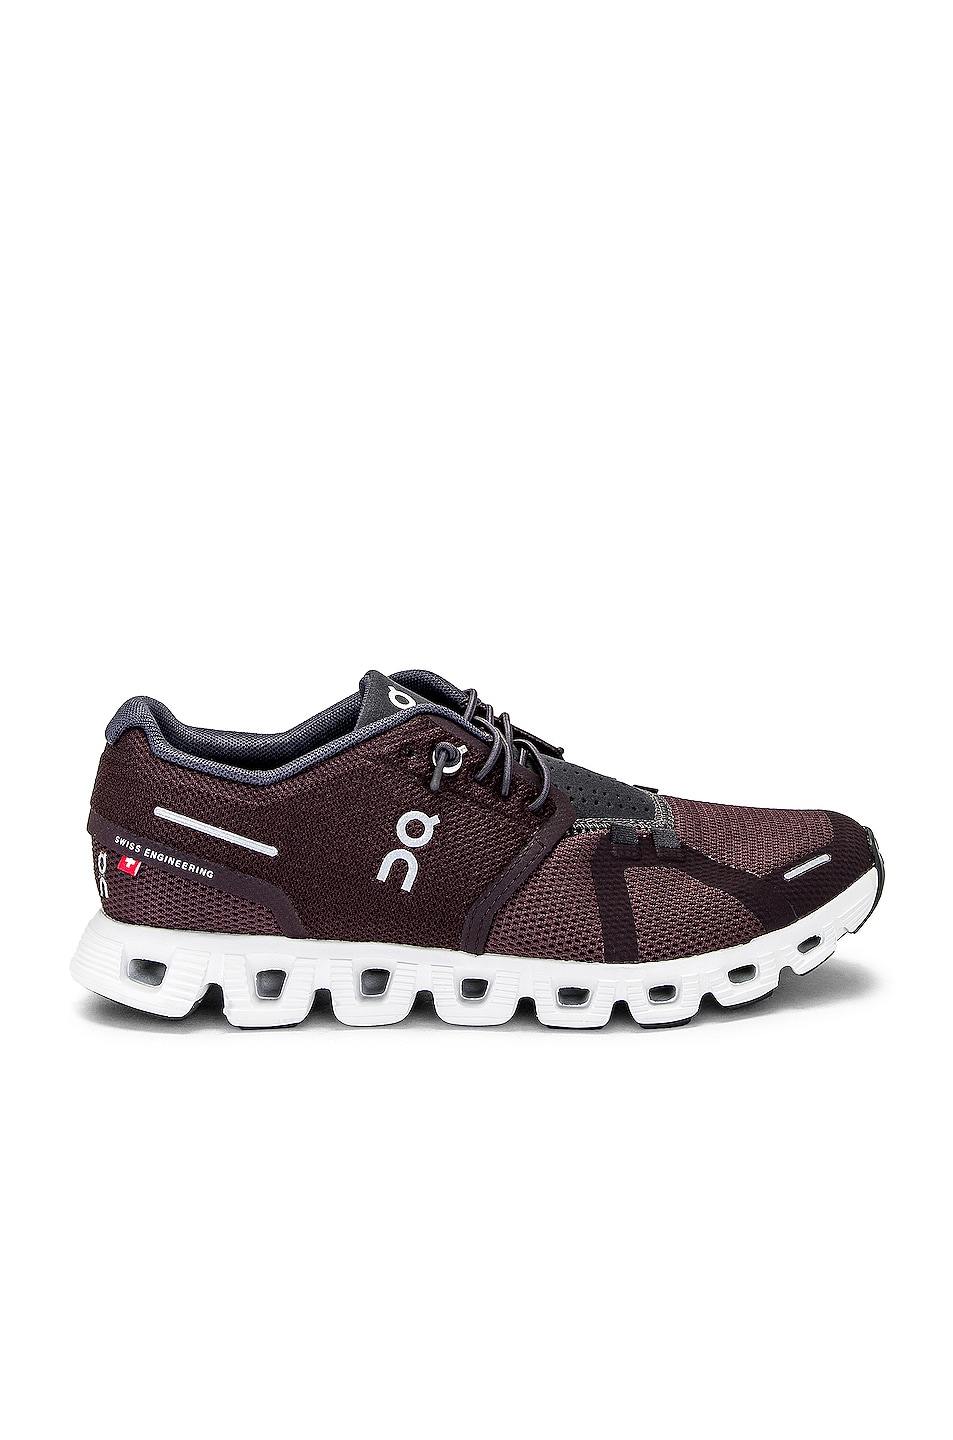 Image 1 of On Cloud 5 Sneaker in Mulberry & Eclipse